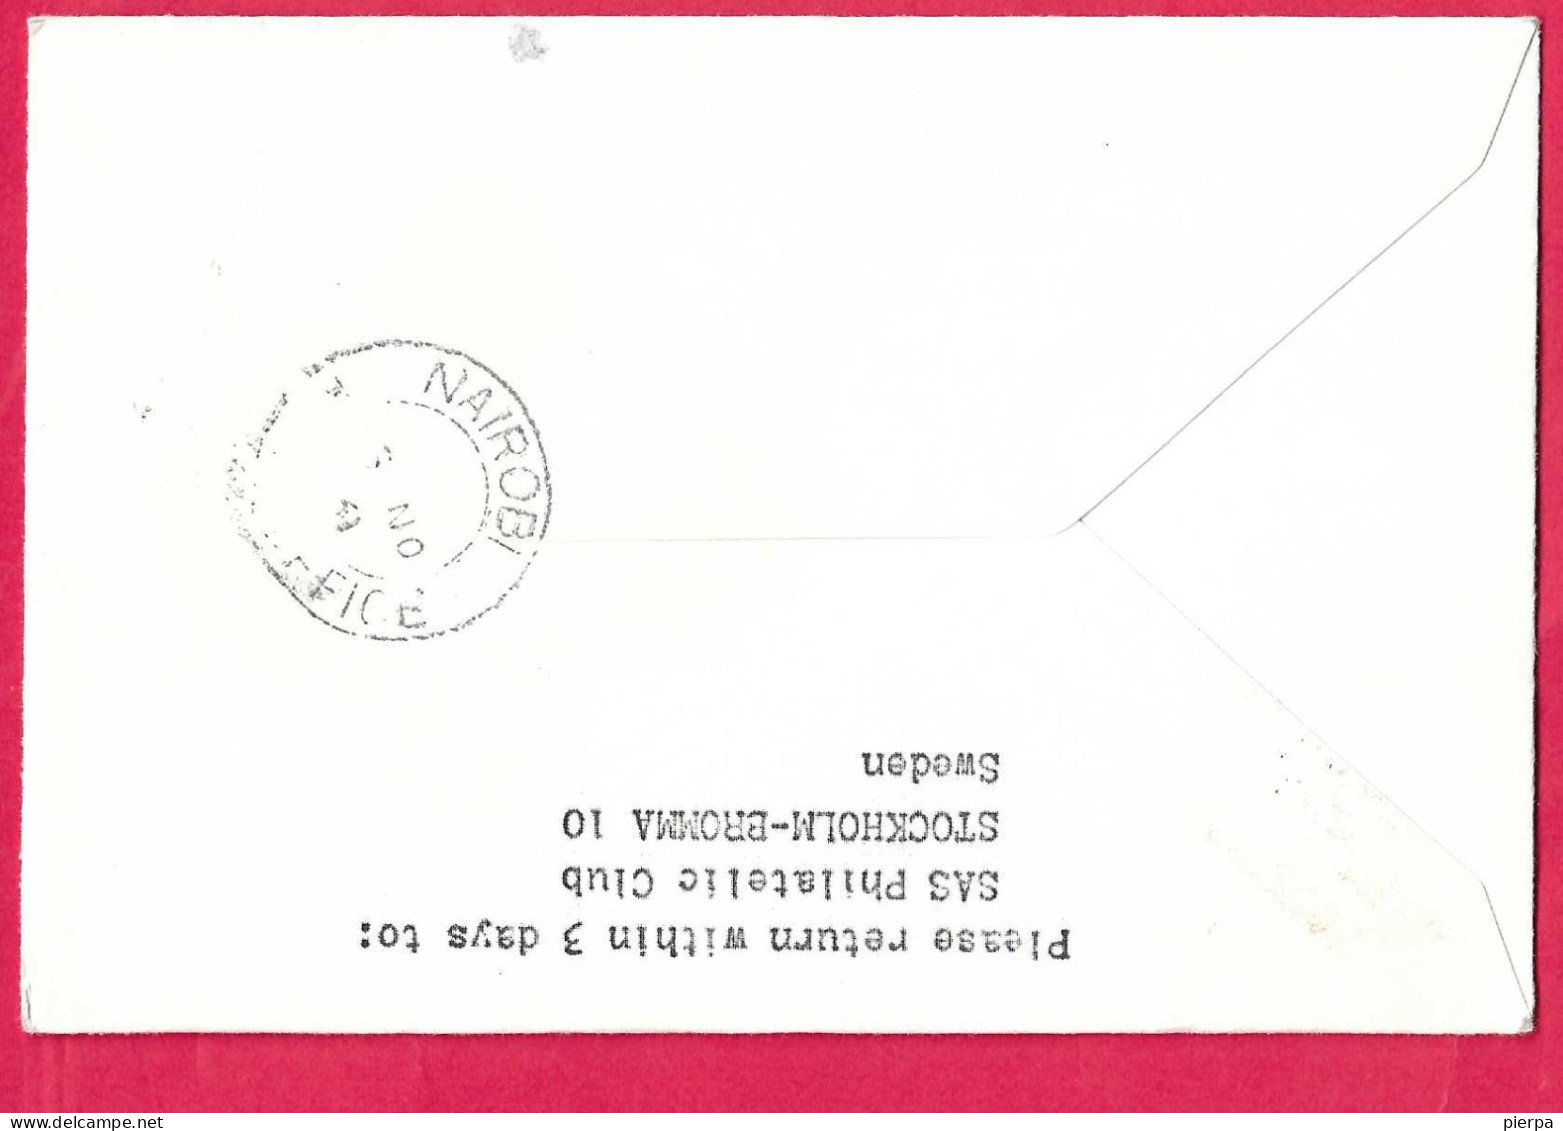 SVERIGE - FIRST DC8 JET FLIGHT SAS FROM STOCKHOLM TO NAIROBI *2.11.1961* ON COVER - Lettres & Documents